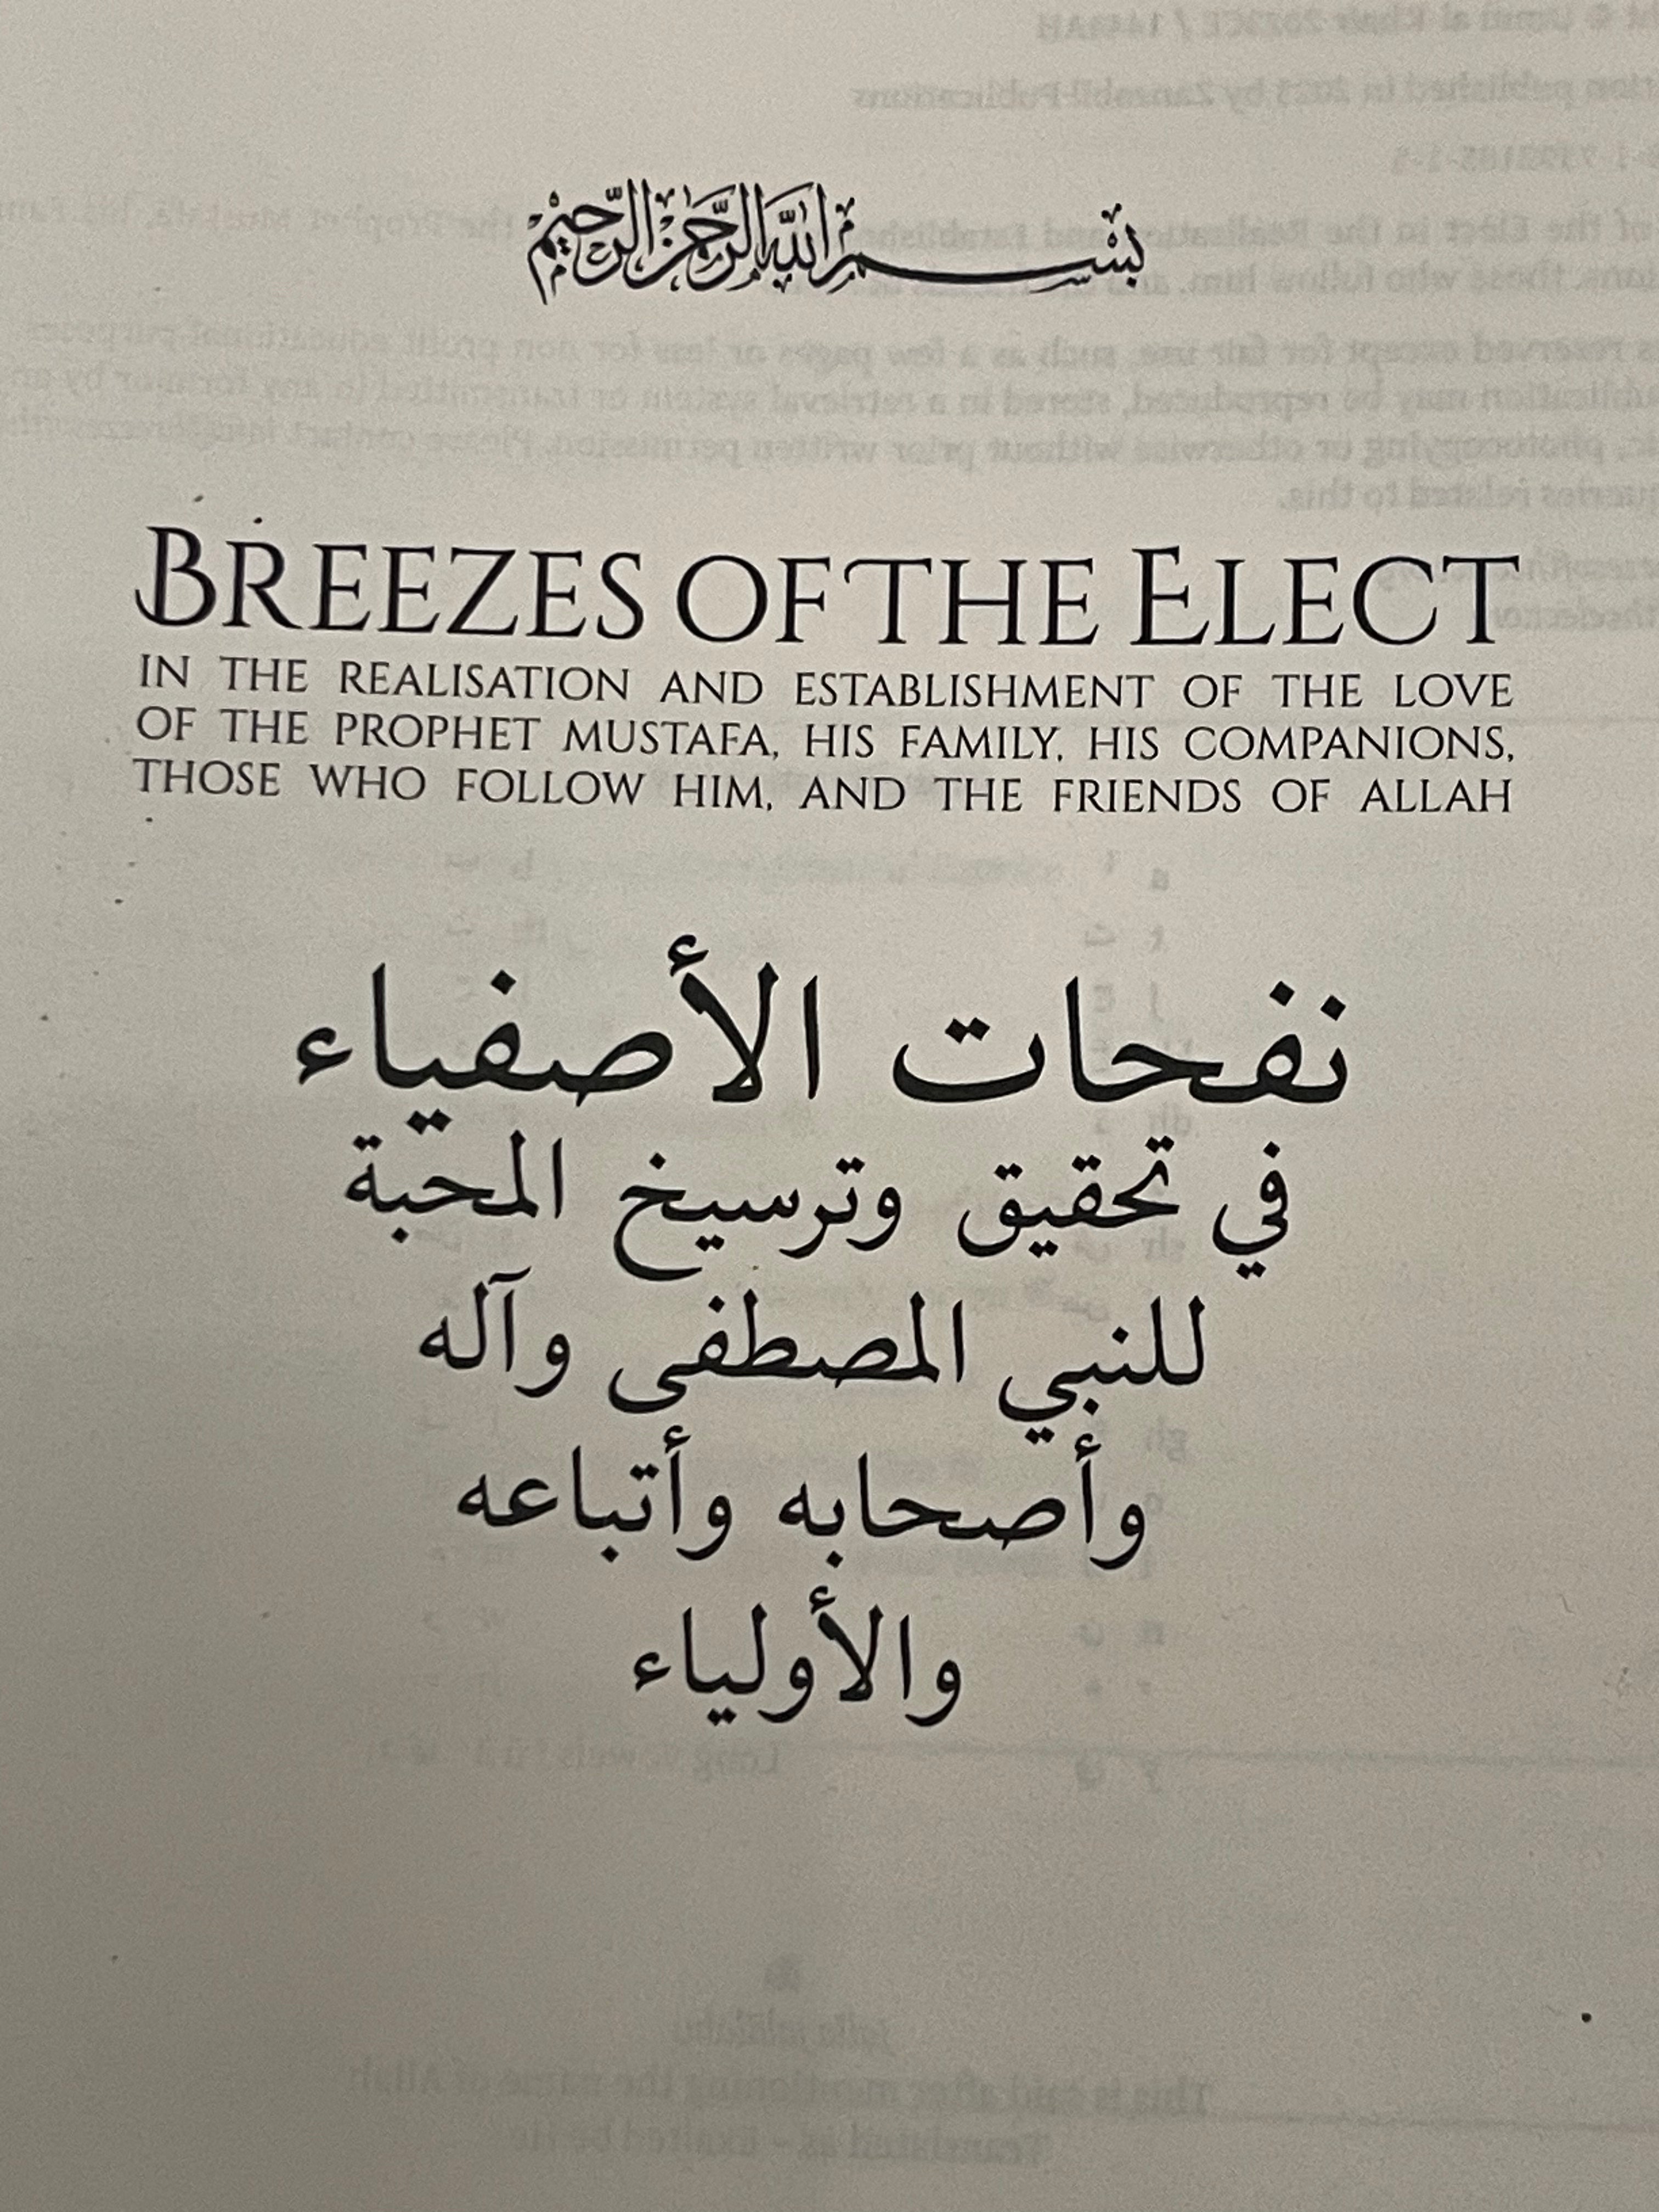 Breezes of The Elect